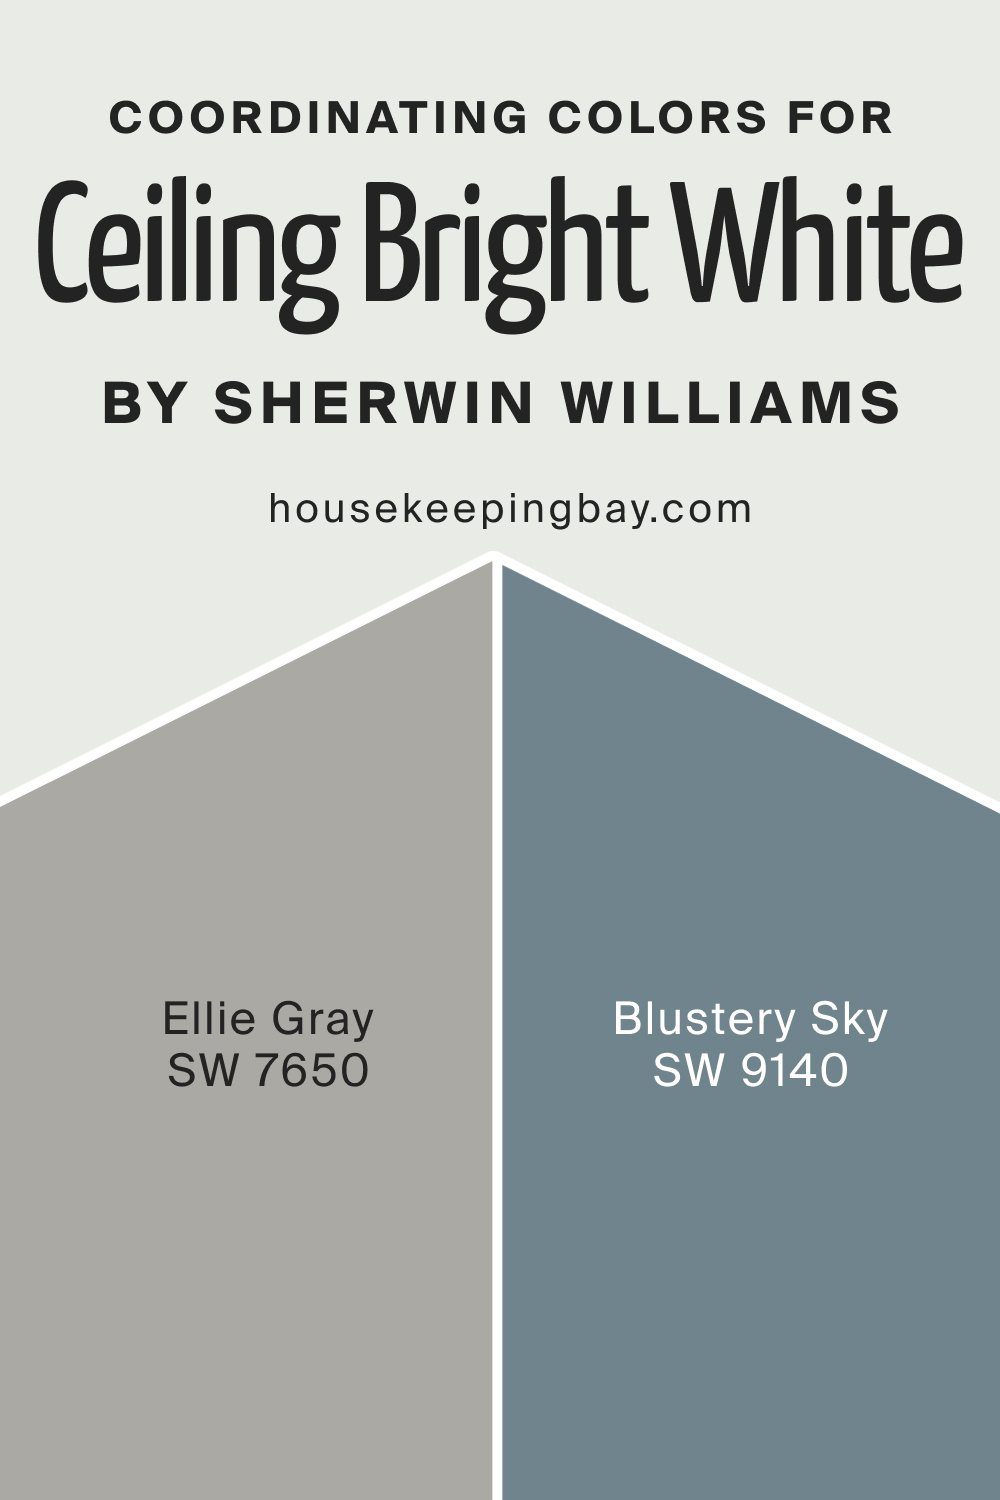 Coordinating Colors for SW Ceiling Bright White by Sherwin Williams